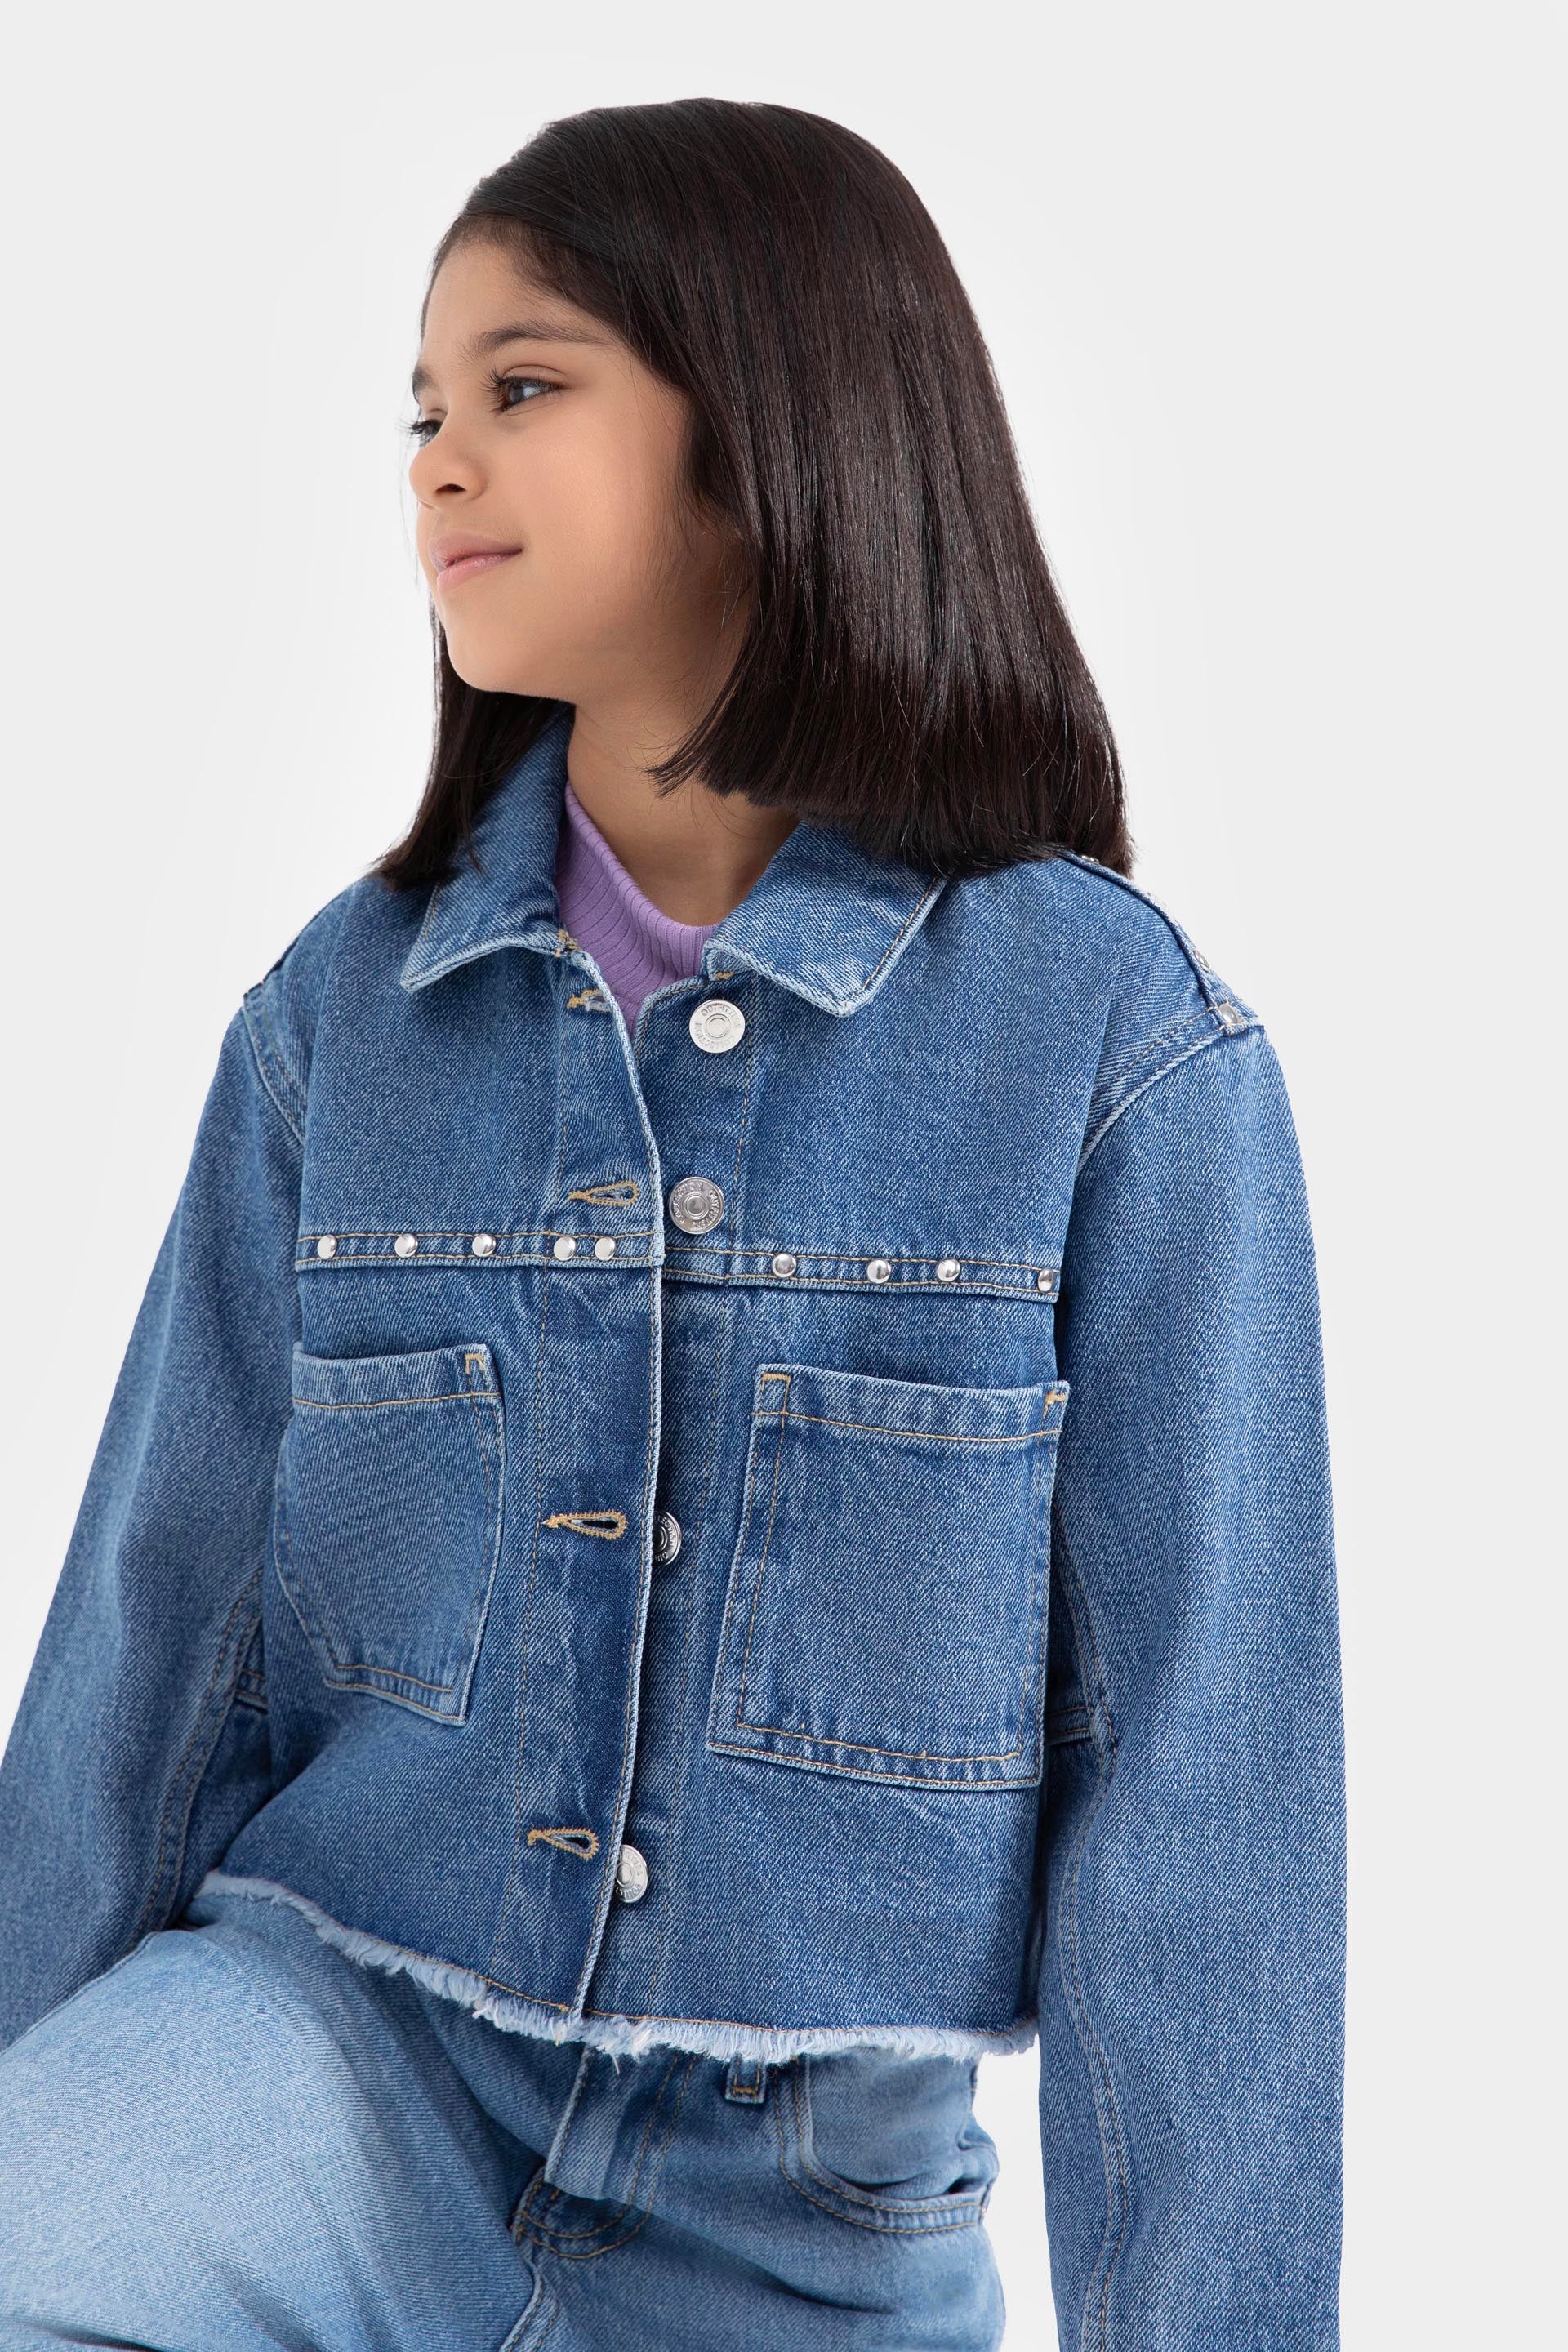 Buy Girls' Denim Jacket With Colorful Floral Embroidery on Collar by  Nannette Kids, Size 6X girls Online in India - Etsy